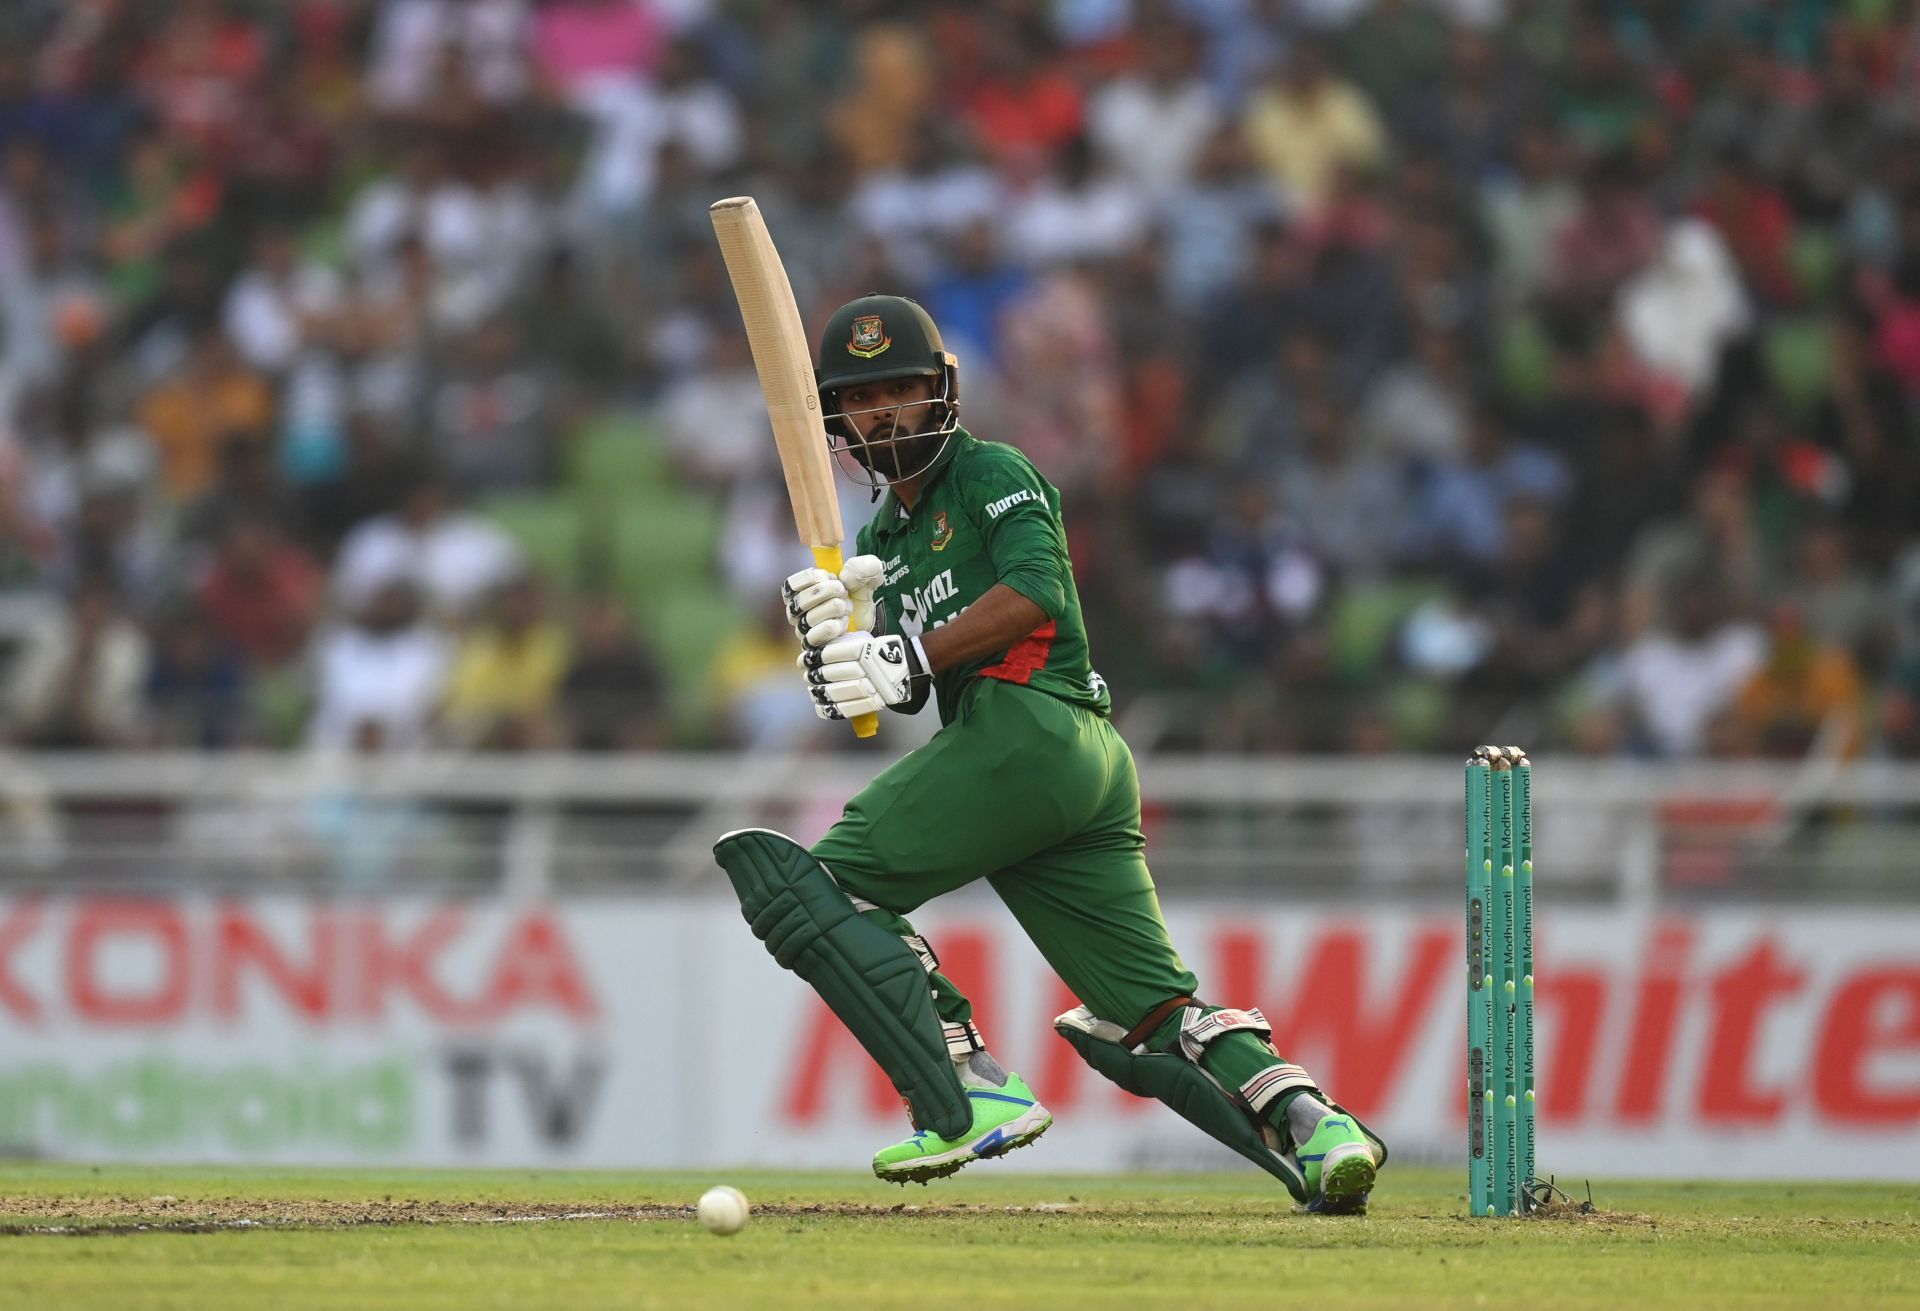 Bangladesh batter Towhid Hridoy (Pic: Getty Images)